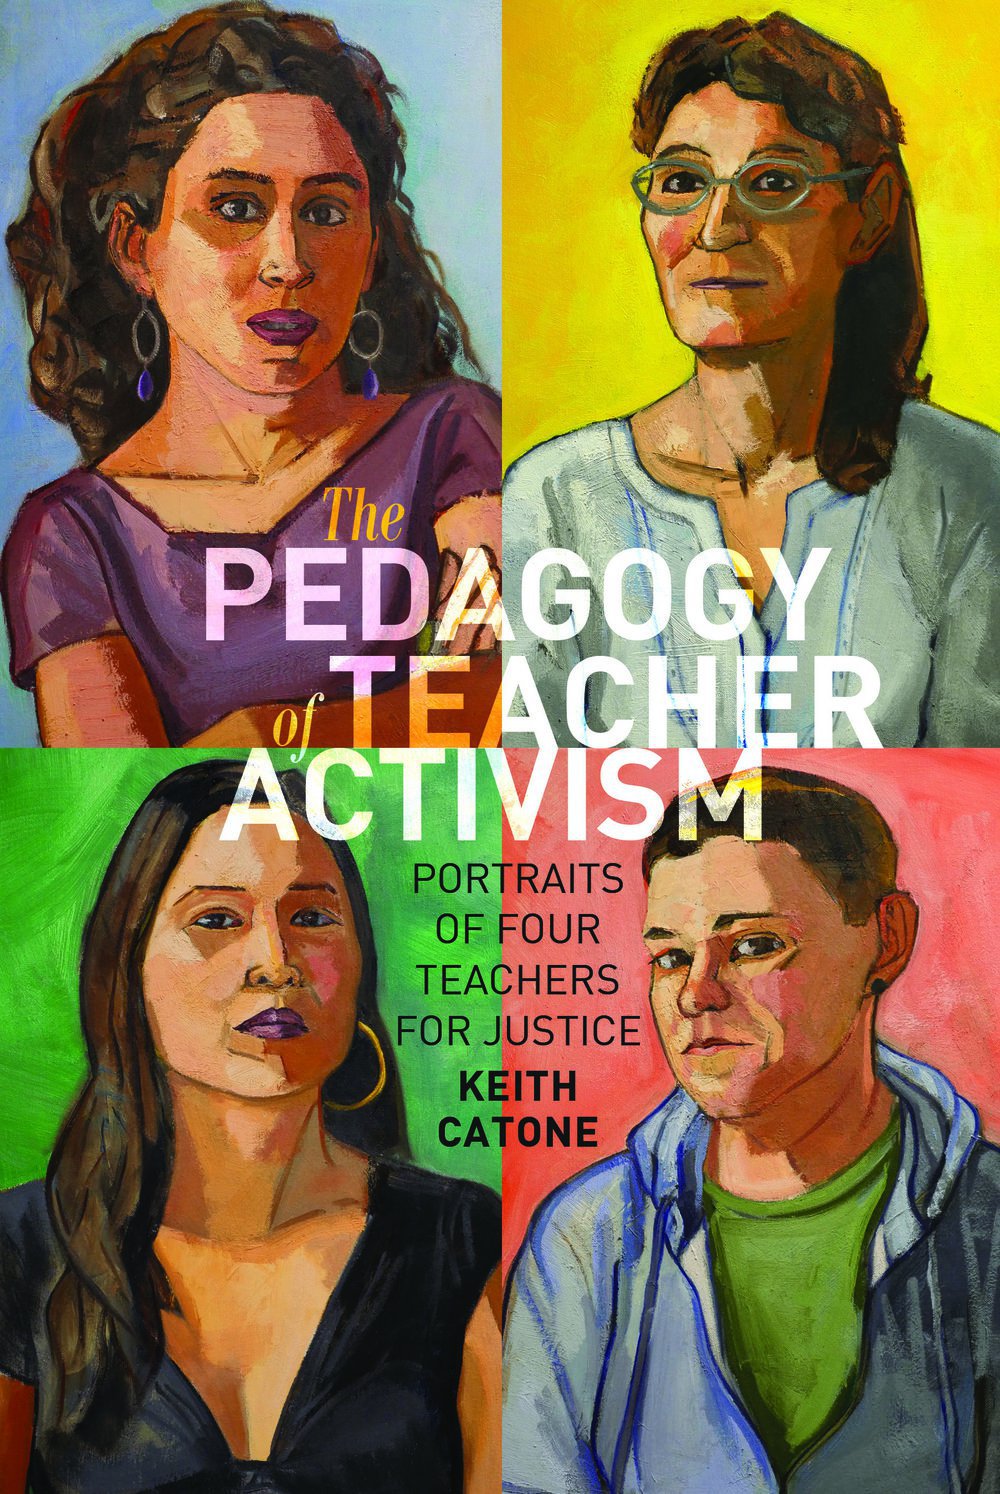 Cover image of the Pedagogy of Teacher Activism: Portraits of Four Teachers for Justice by Keith Catone.